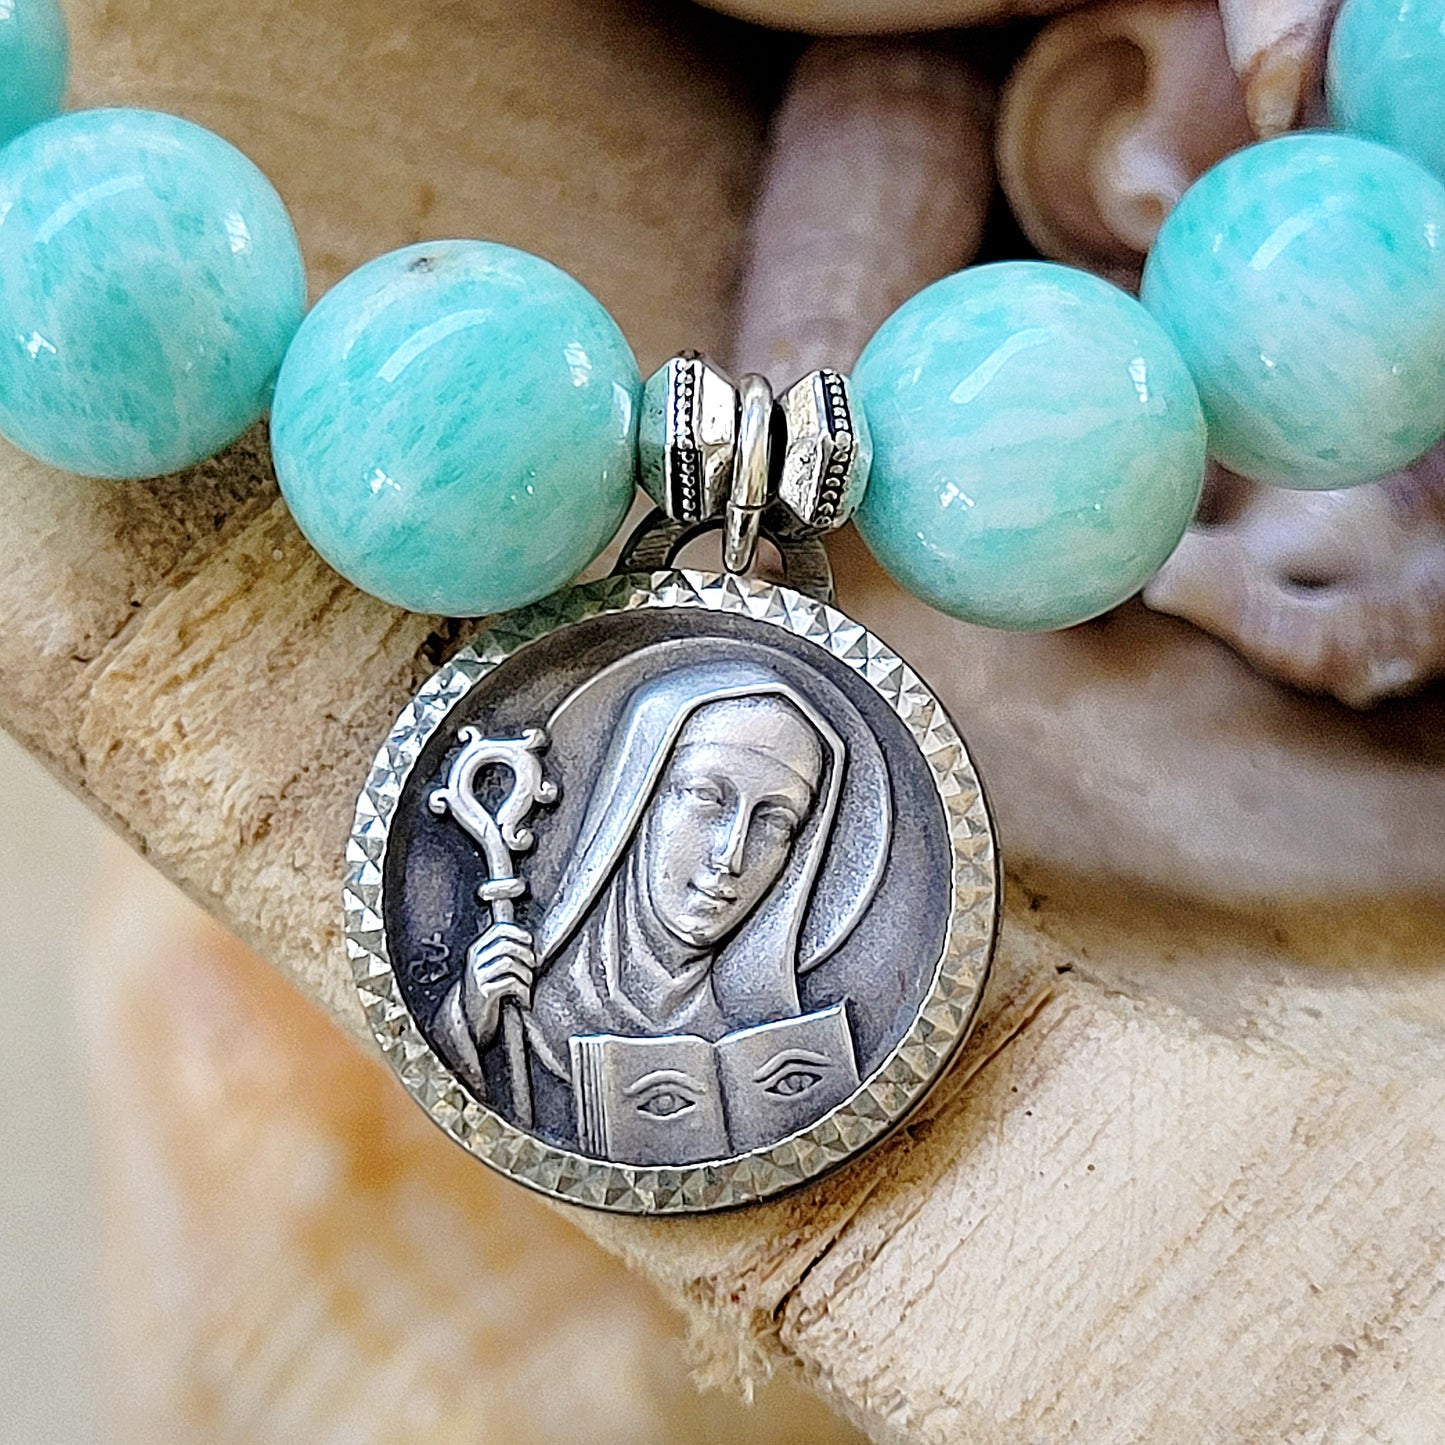 Brazilian Amazonite 12mm Beaded Bracelet w/ St. Odile of Alsace Religious Medal - Afterlife Jewelry Designs